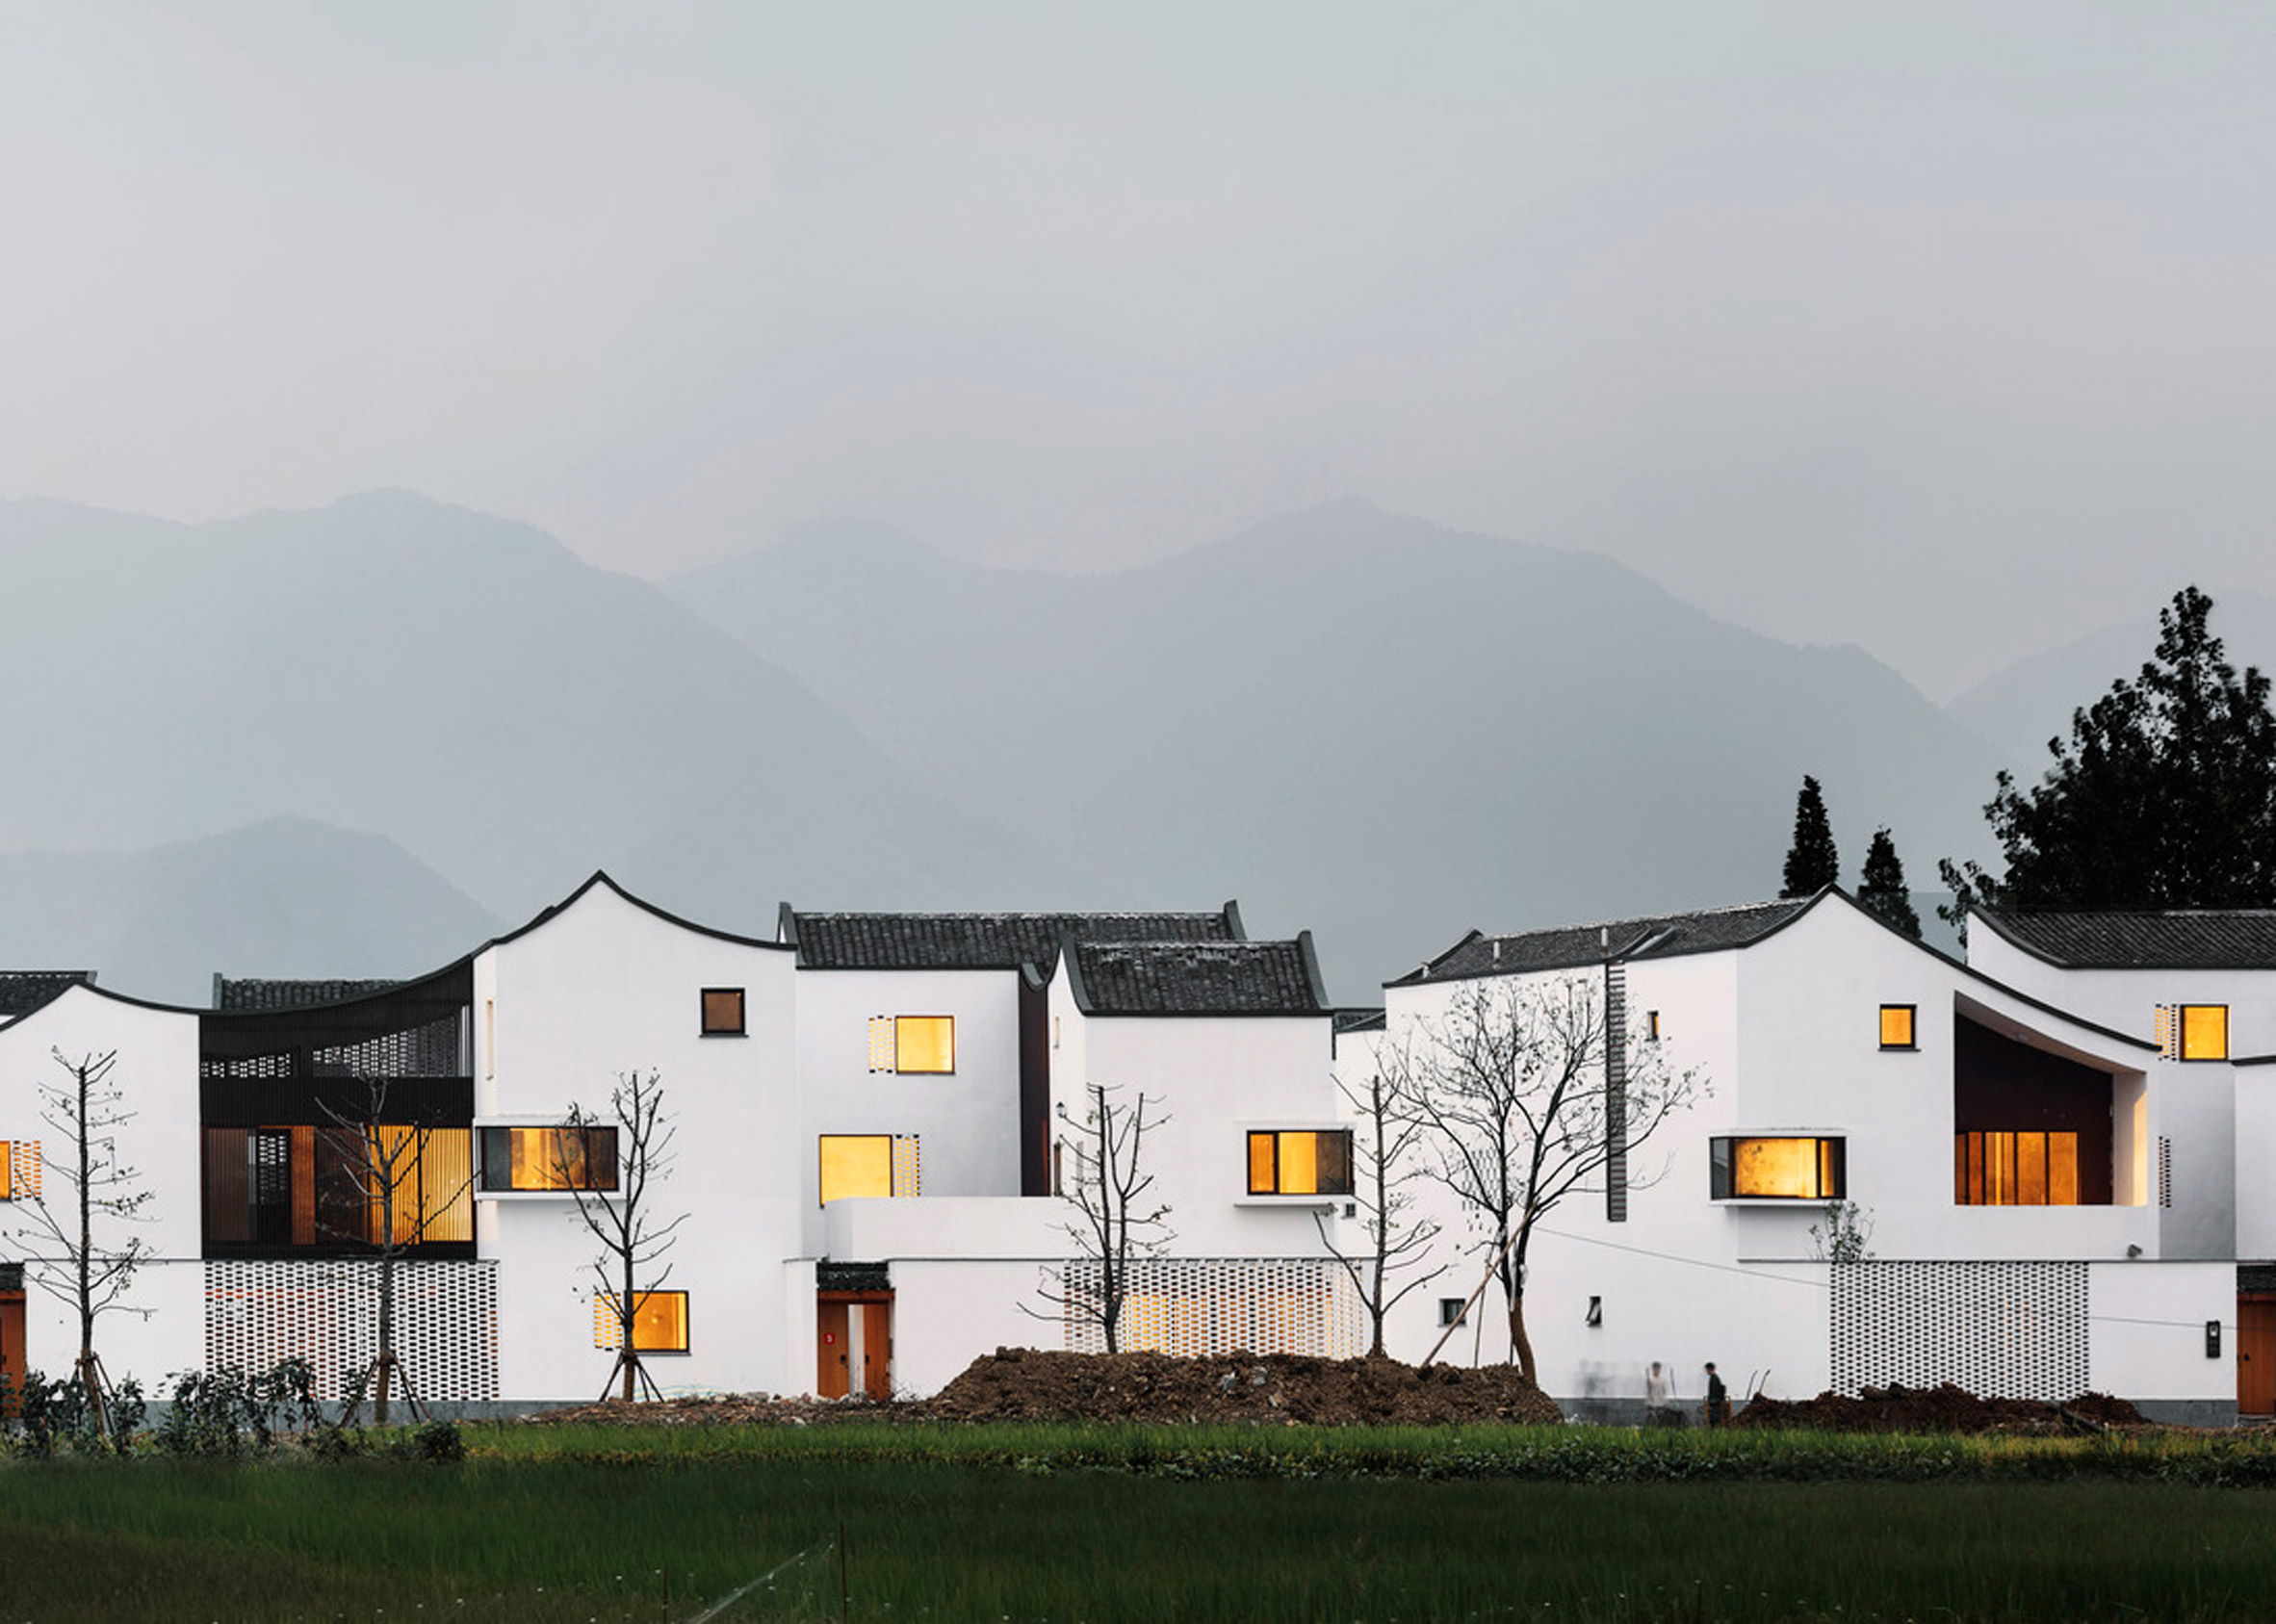 Dezeen Awards architecture winners: Dongziguan Affordable Housing by Gad Line+ Studio